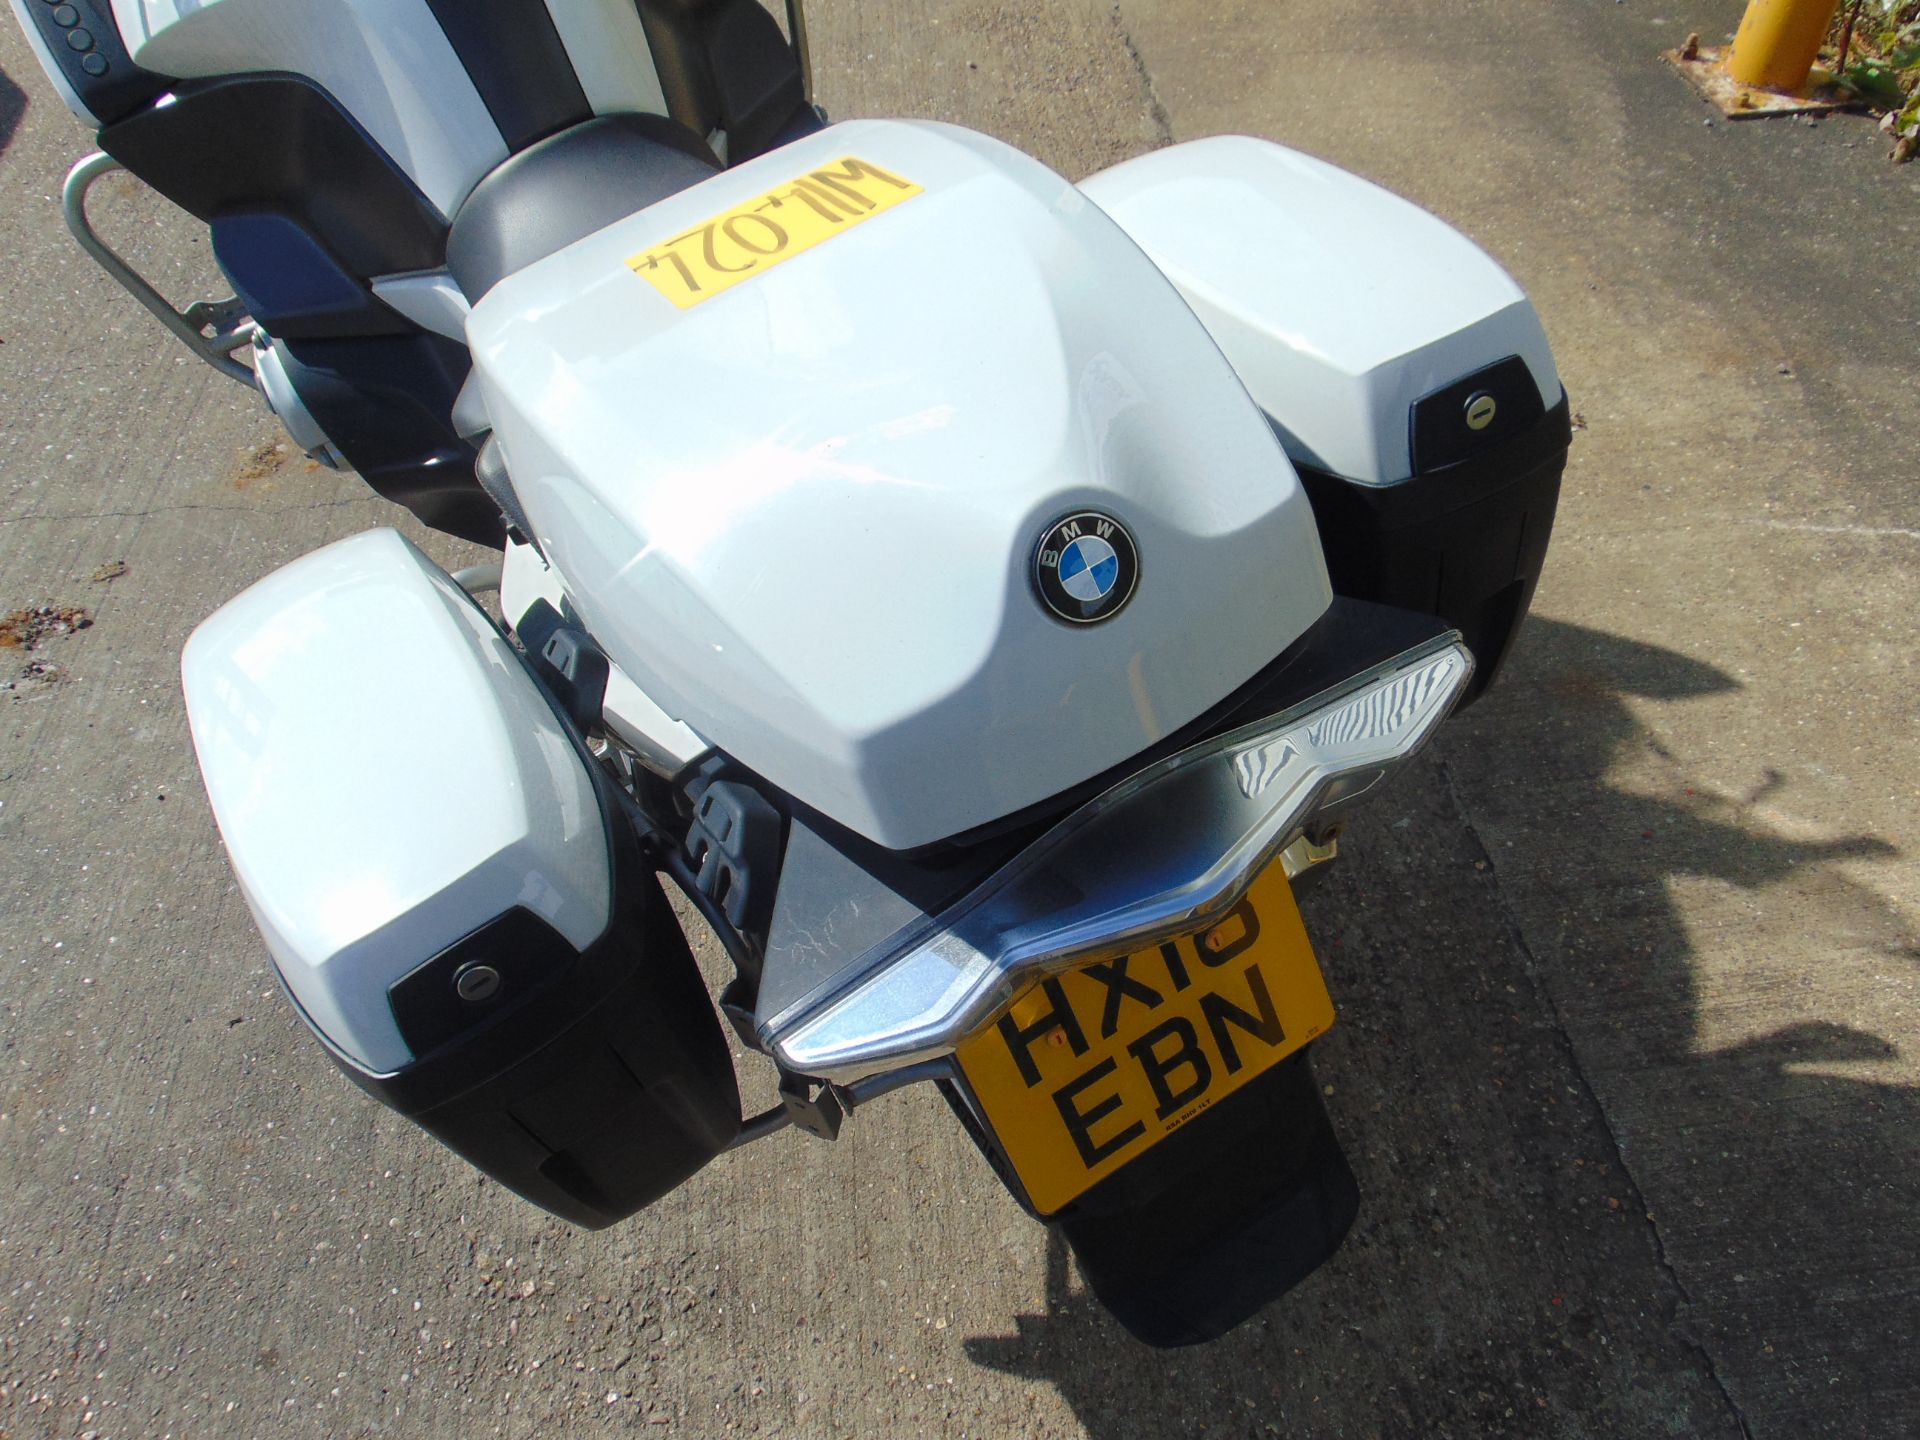 2018 BMW R1200RT Motorbike 50,000 miles from UK Police - Image 33 of 38